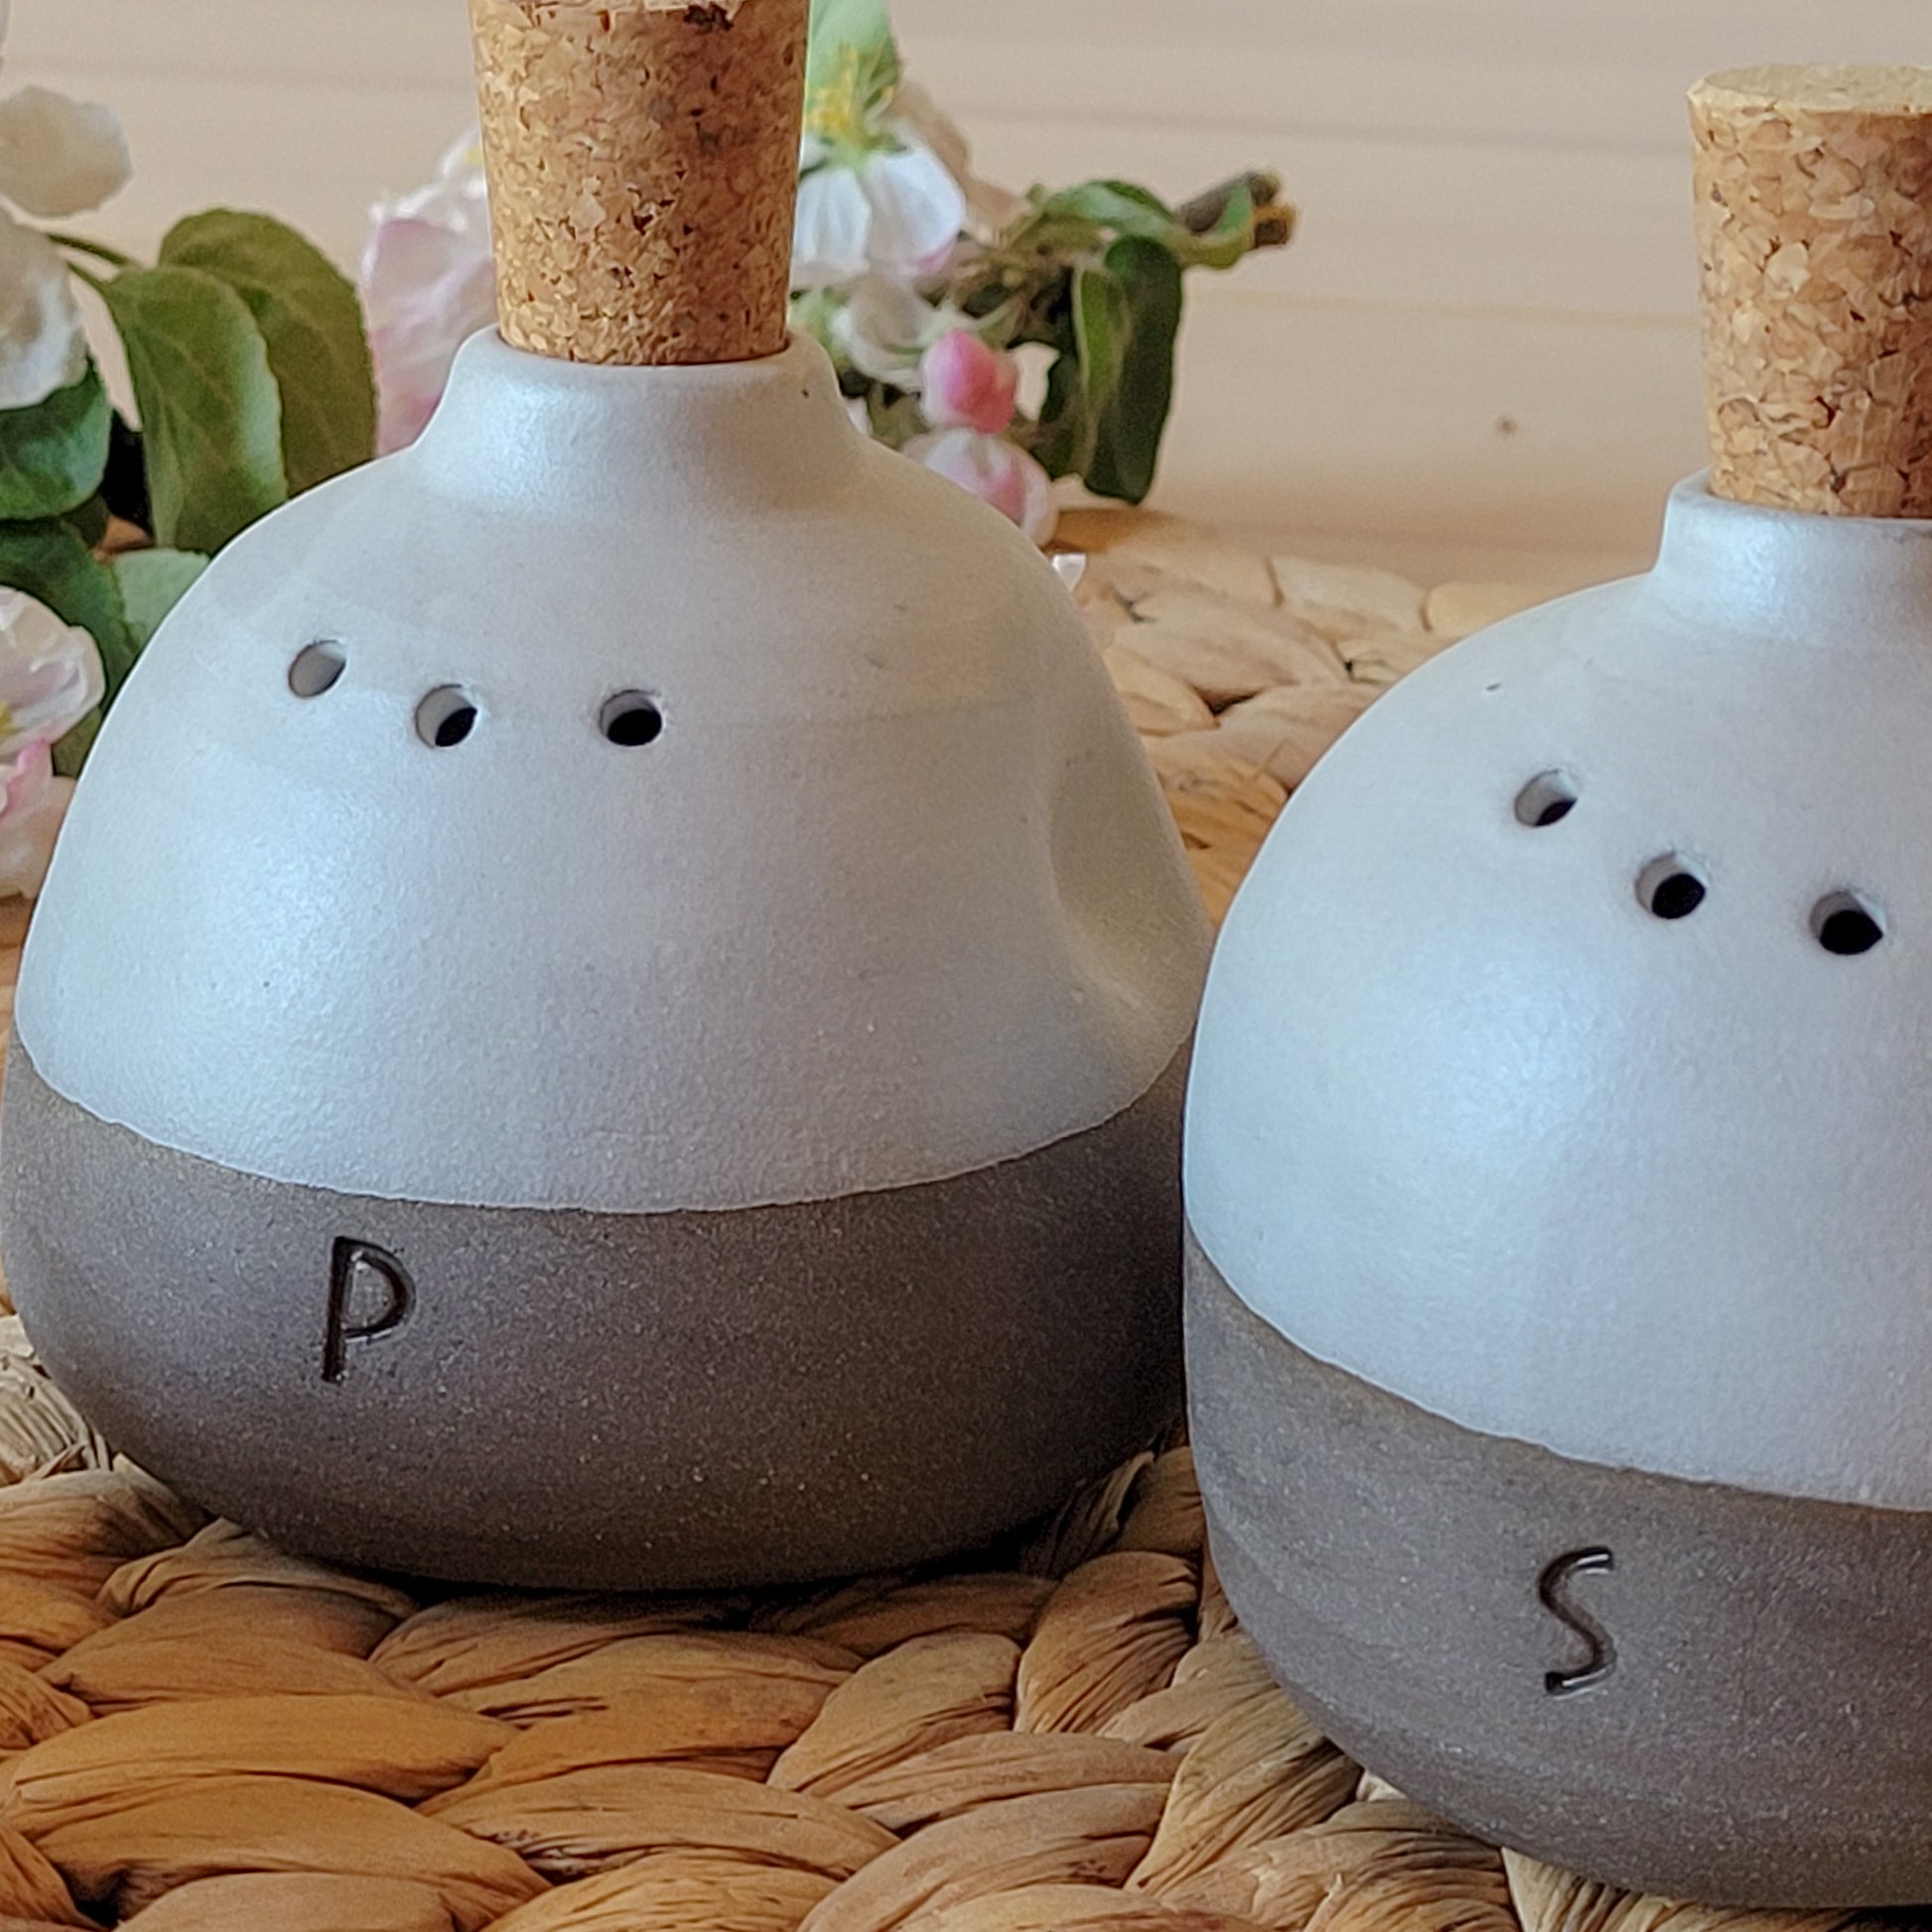 Looking for a perfect housewarming gift? This set of two handcrafted pottery salt and pepper shakers is handmade and unique.